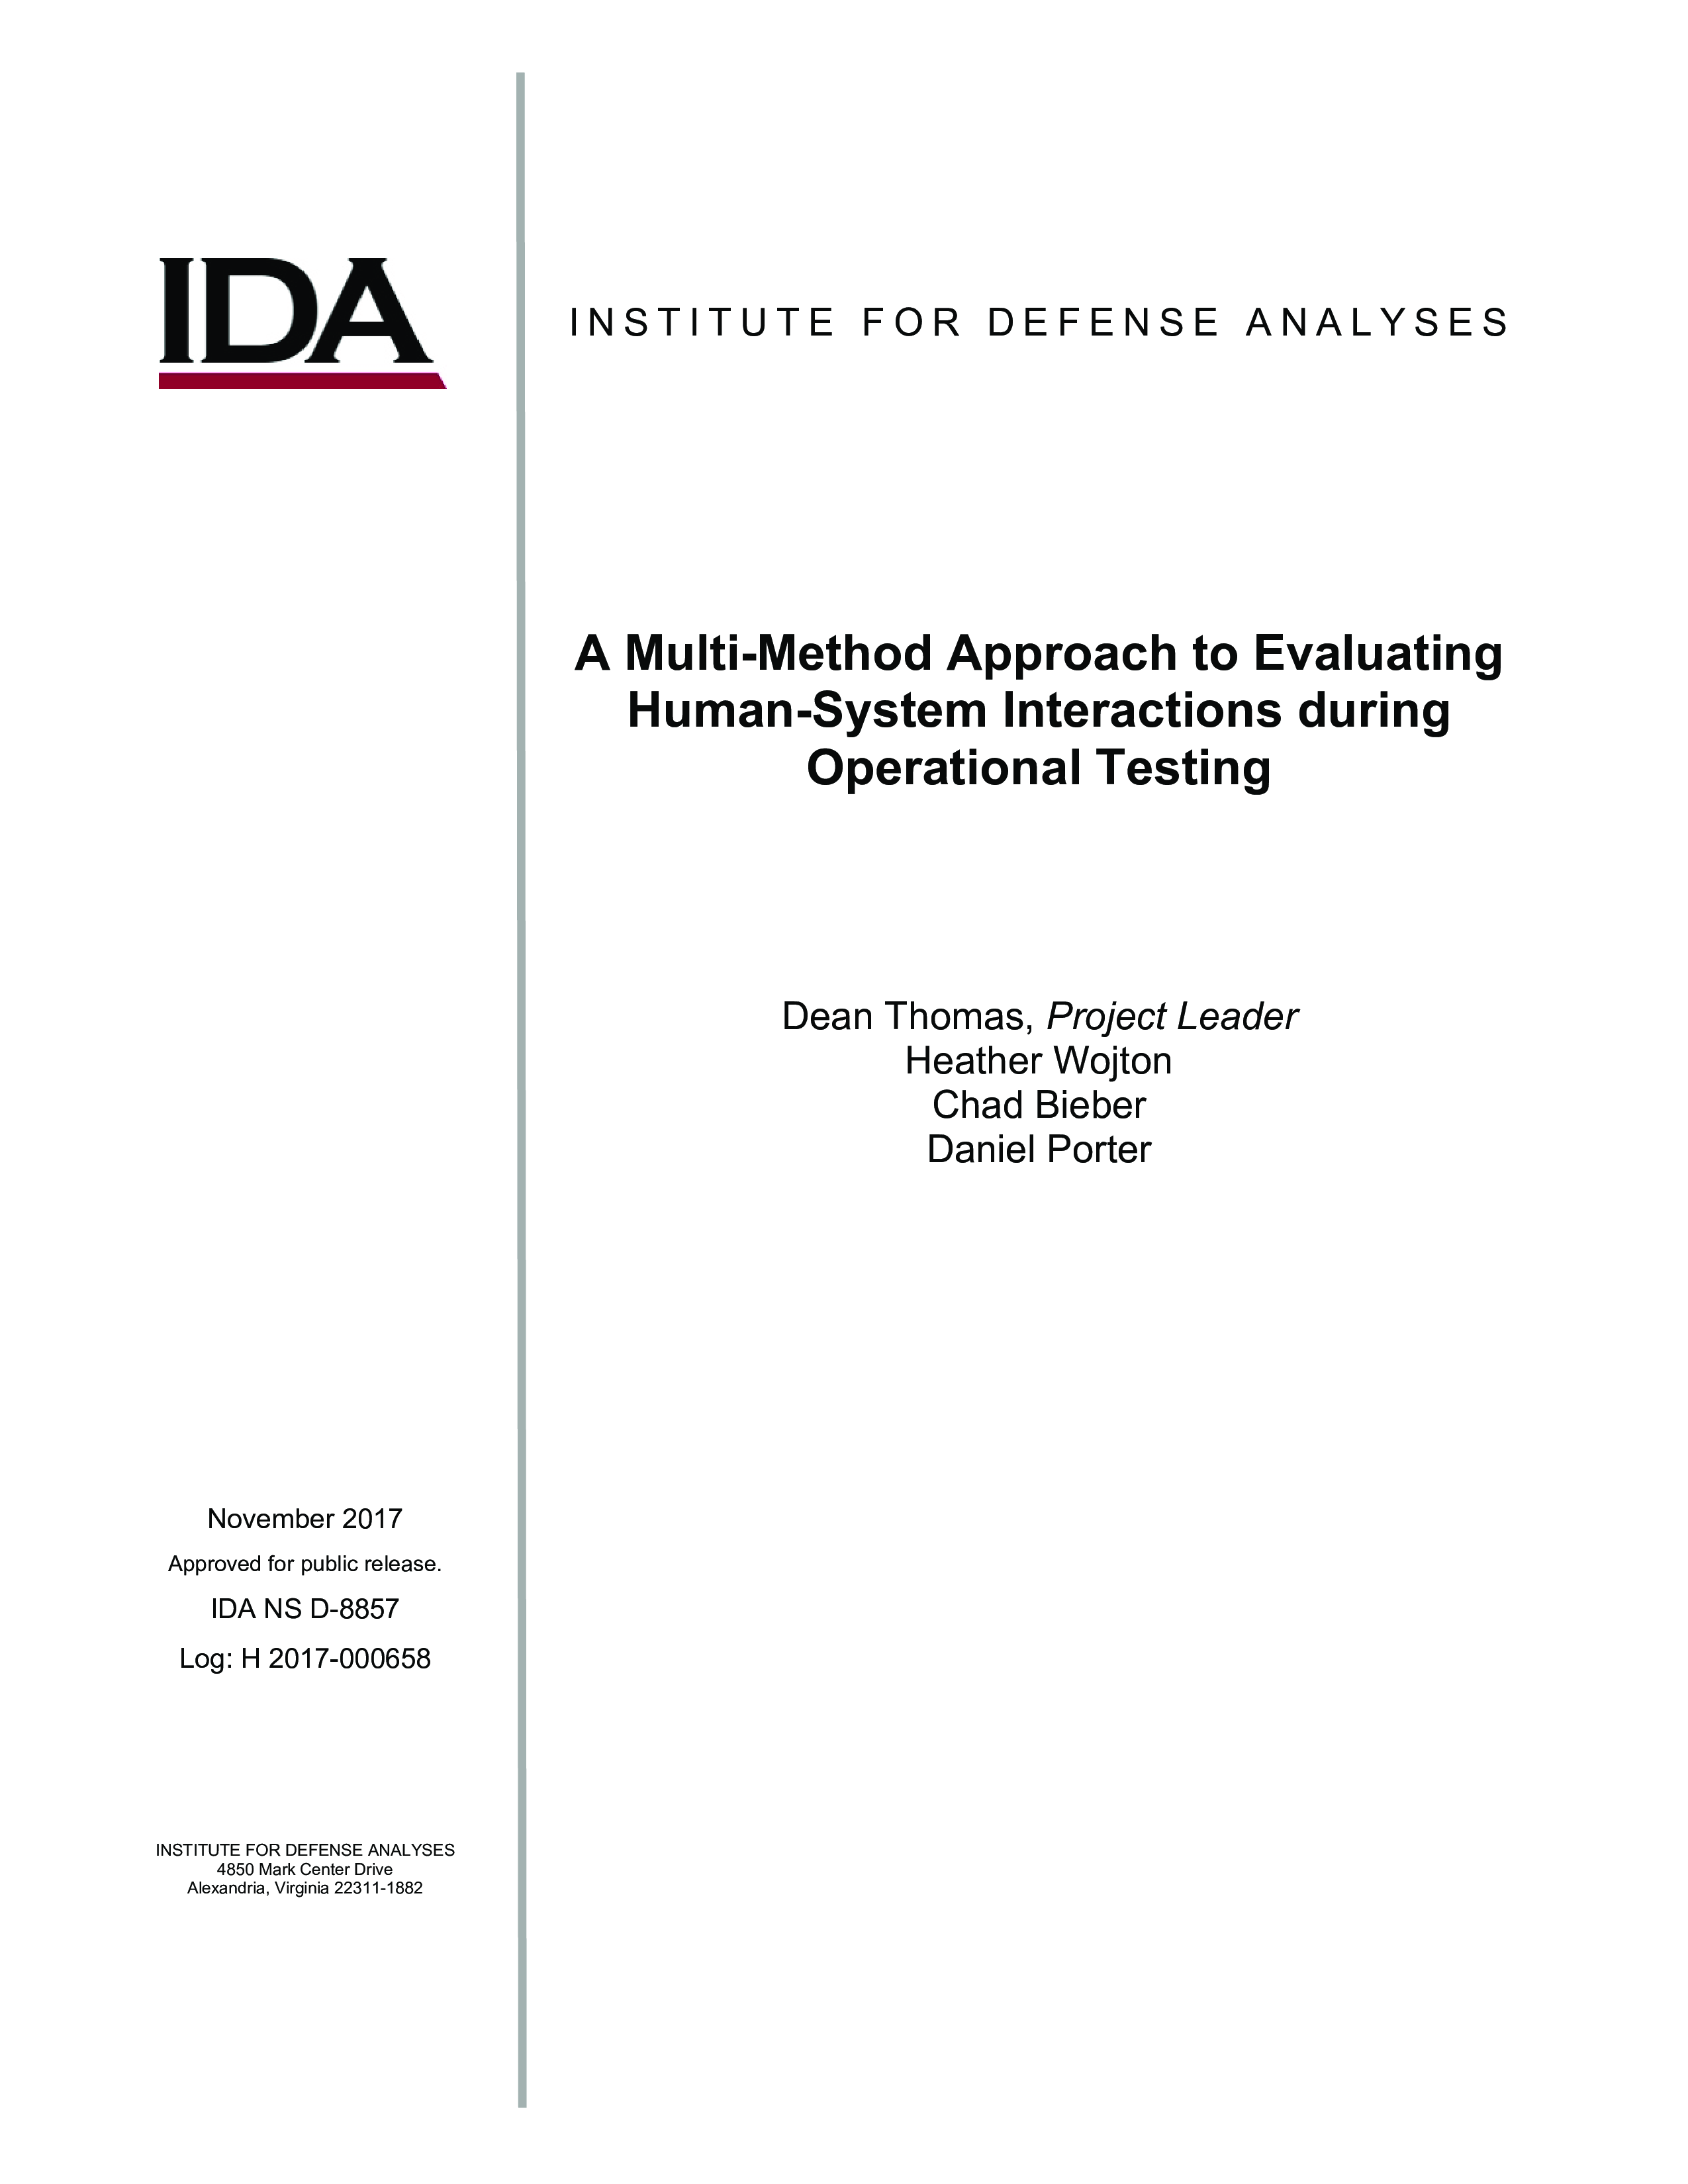 A Multi-Method Approach to Evaluating Human-System Interactions during Operational Testing